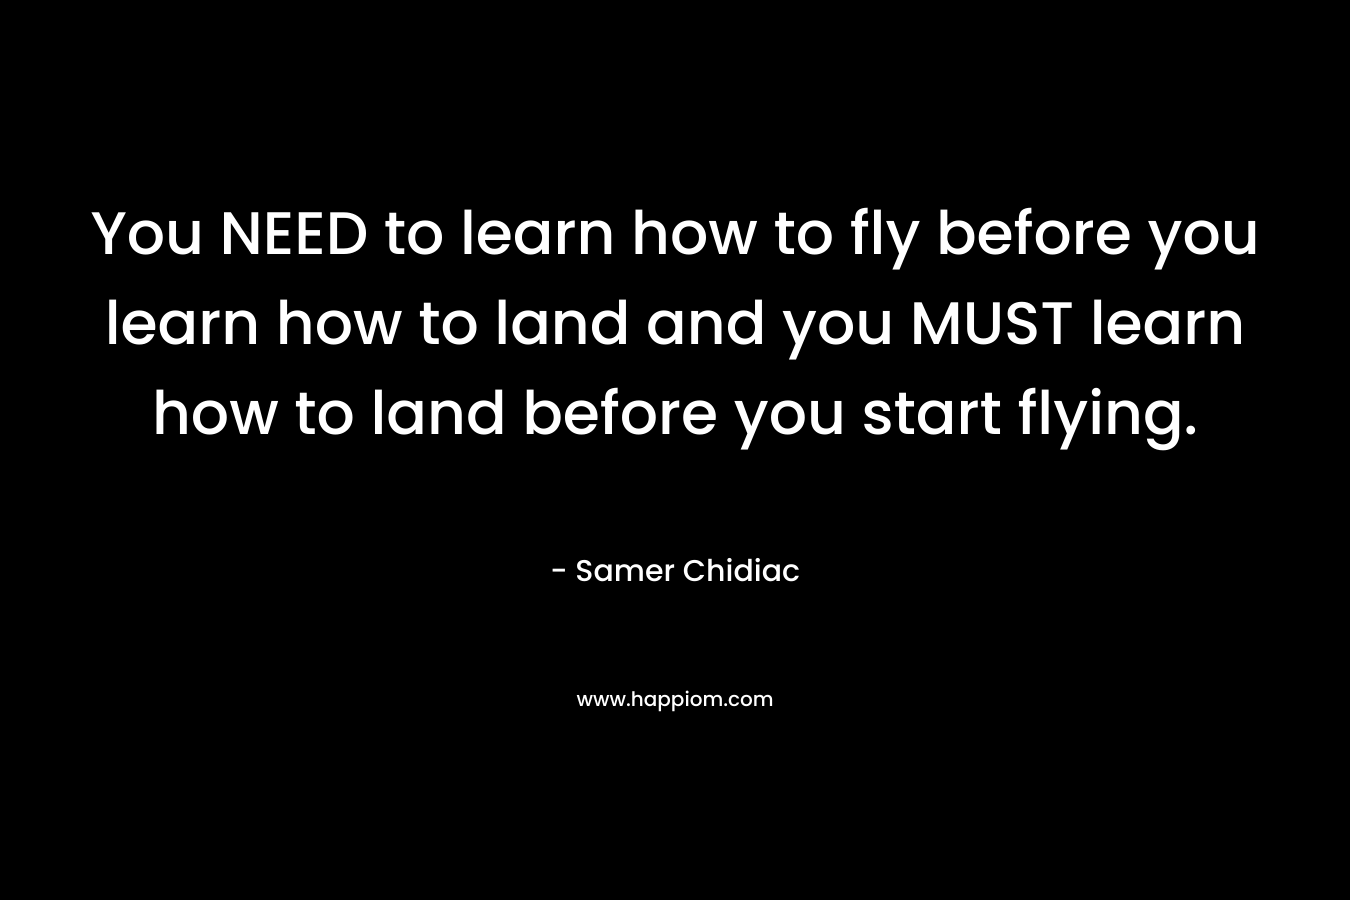 You NEED to learn how to fly before you learn how to land and you MUST learn how to land before you start flying.